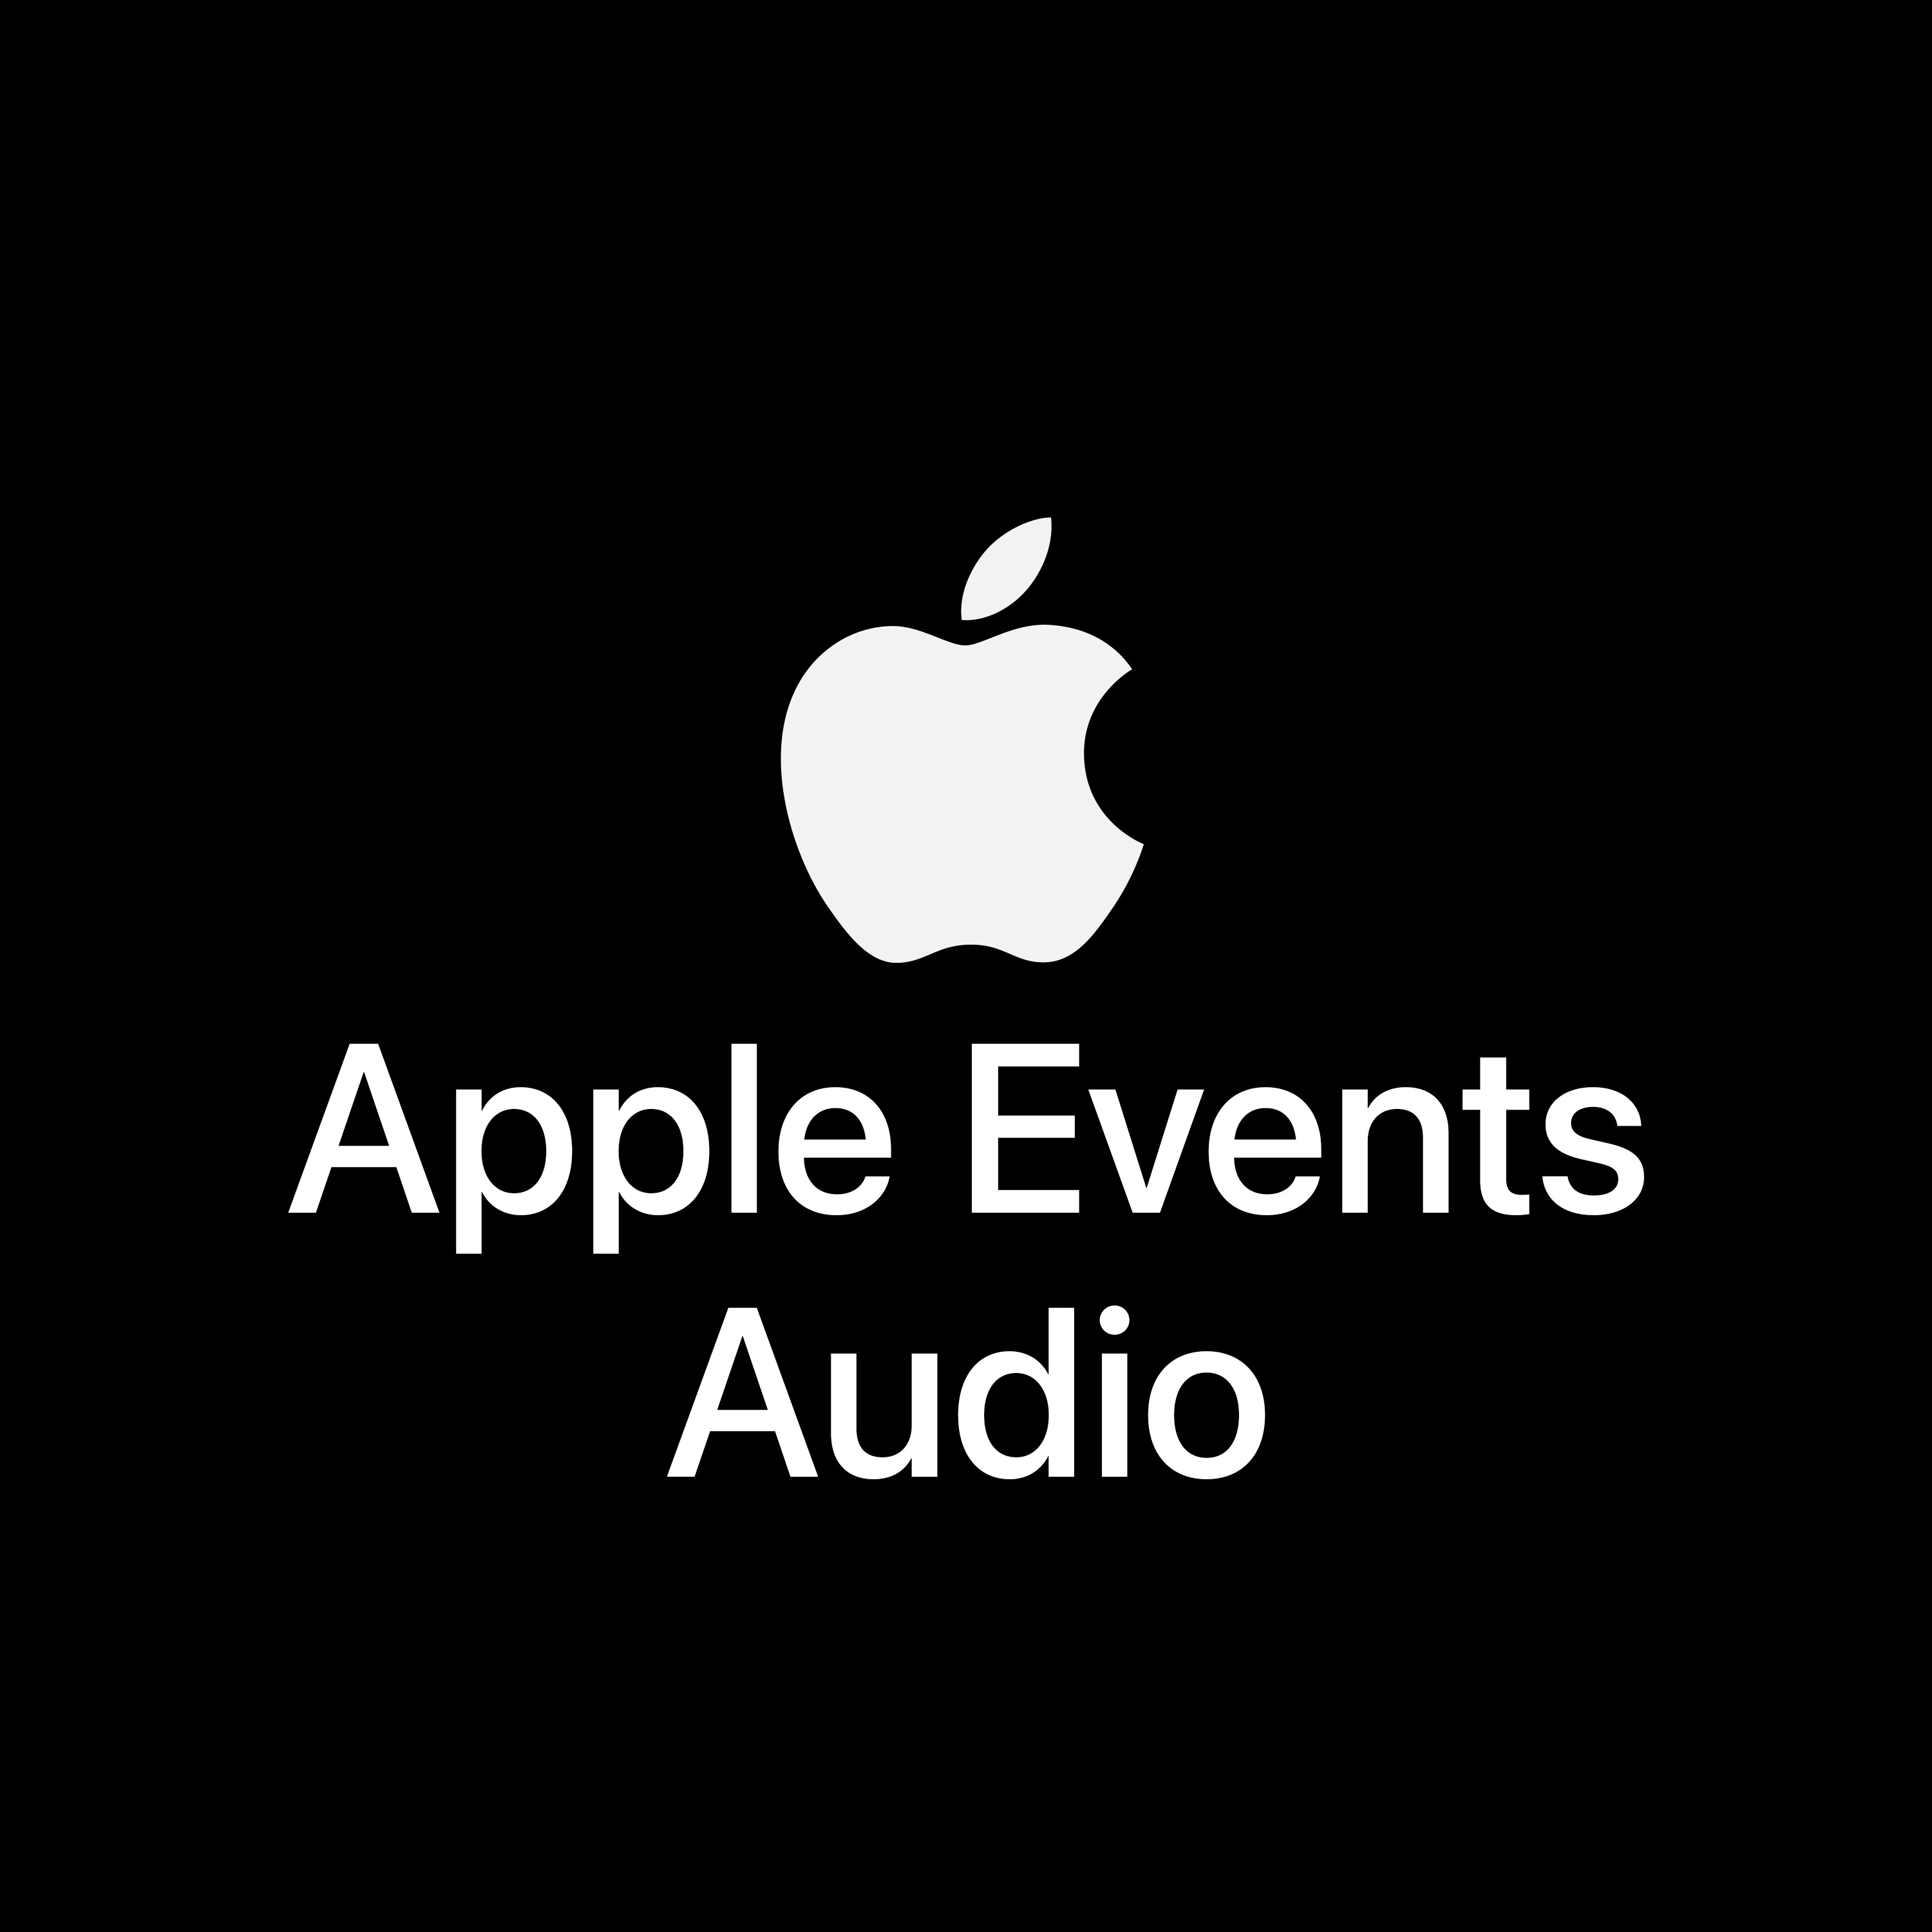 Introducing Apple Events